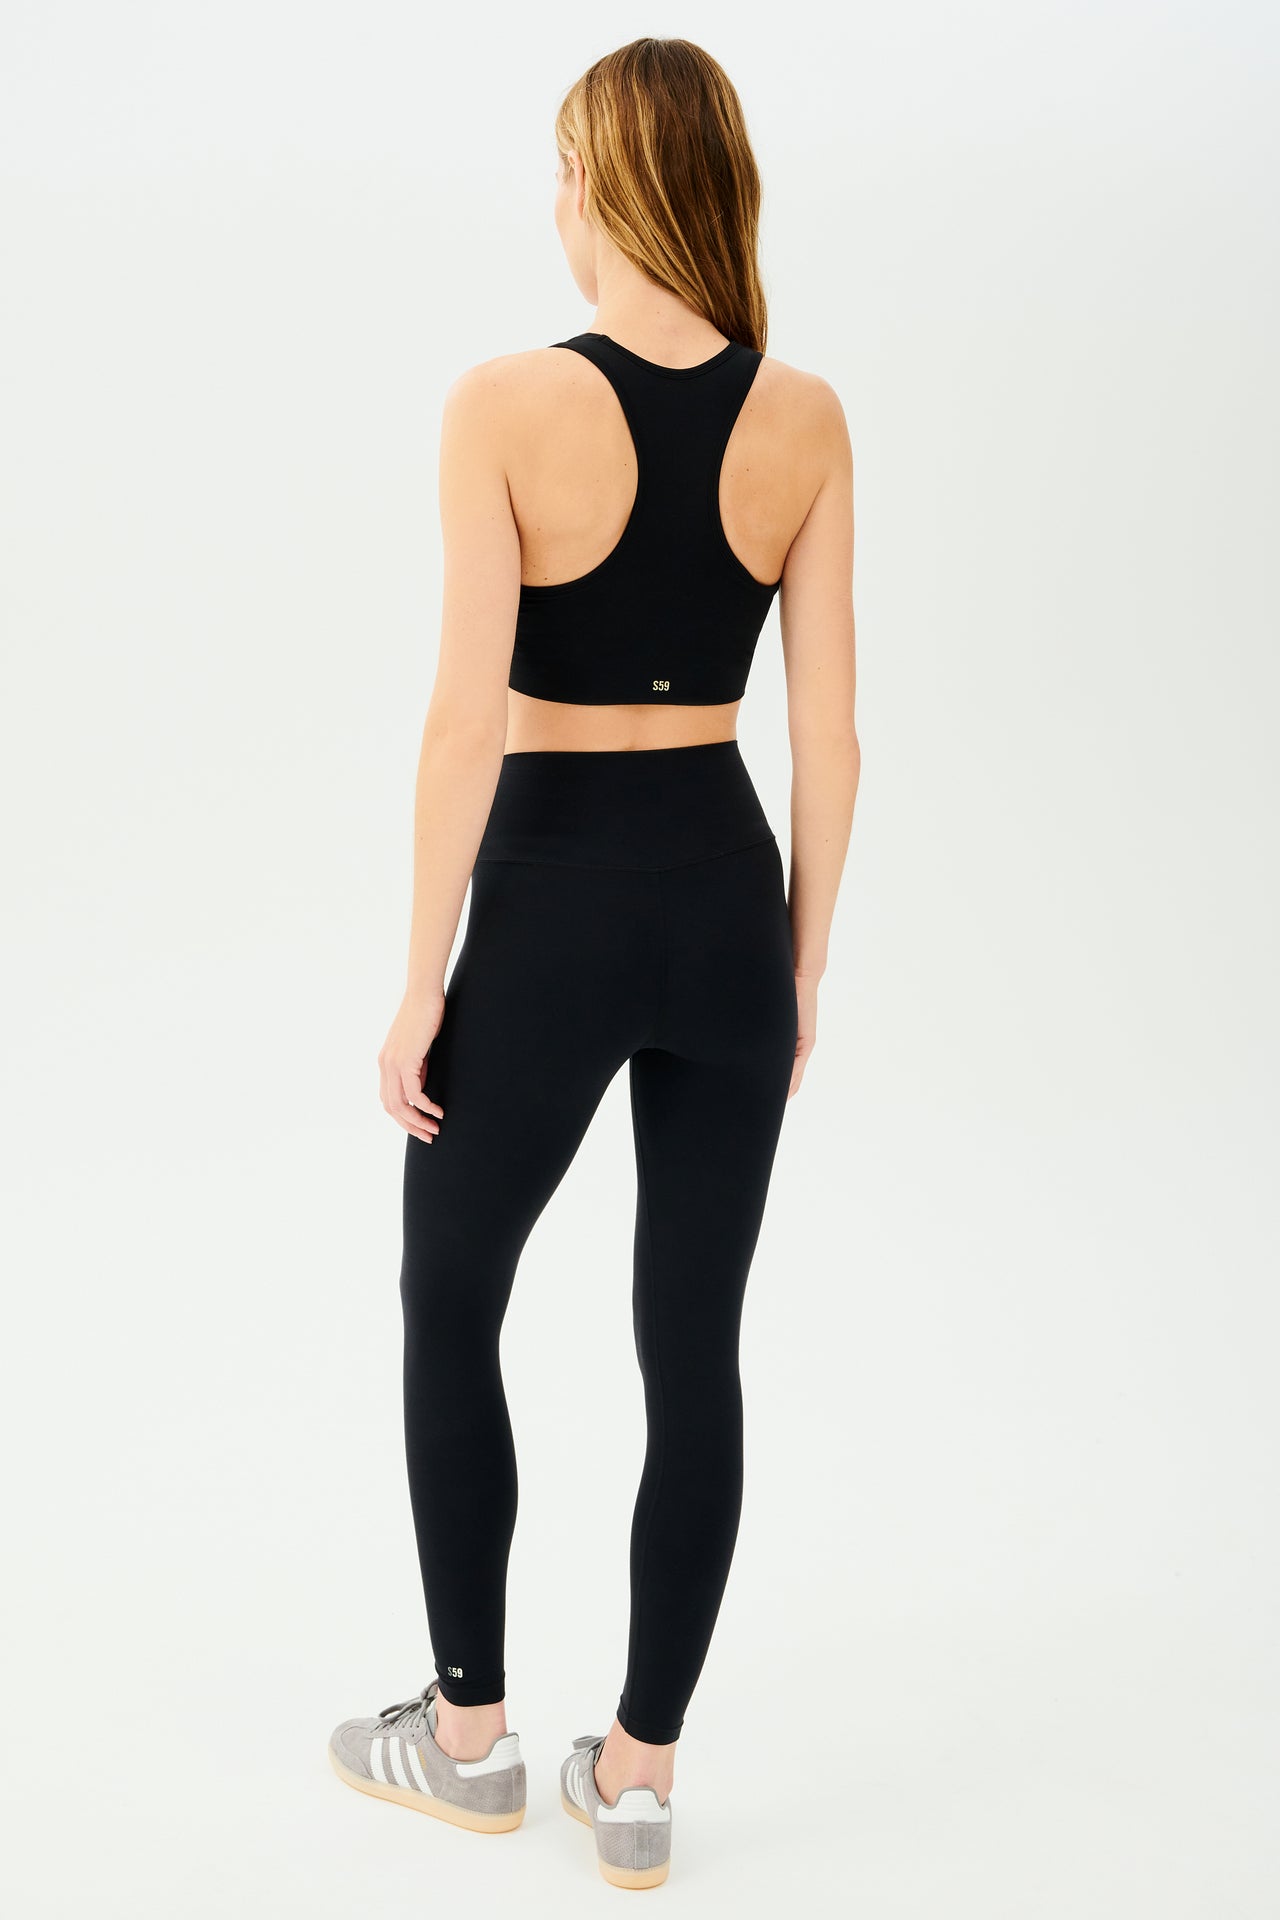 Full back view of girl wearing black sports bra with scrunch and black leggings with grey shoes with 3 stripes